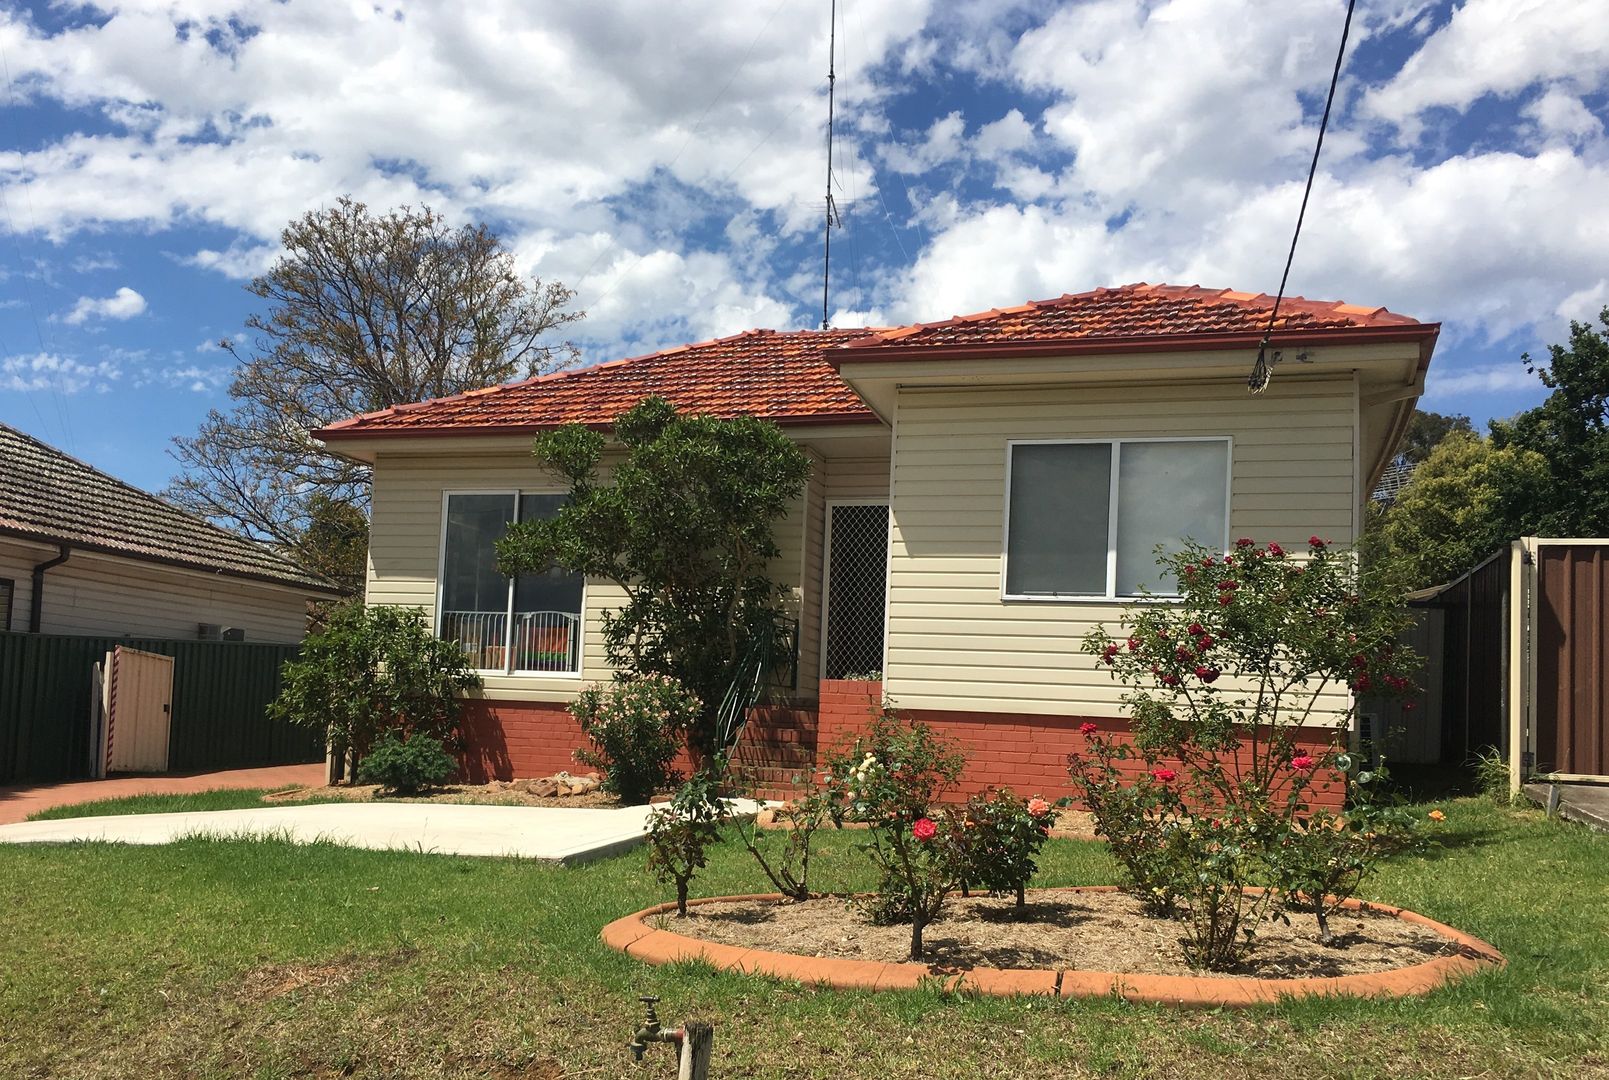 40 Hoddle Avenue, Campbelltown | Property History & Address Research ...